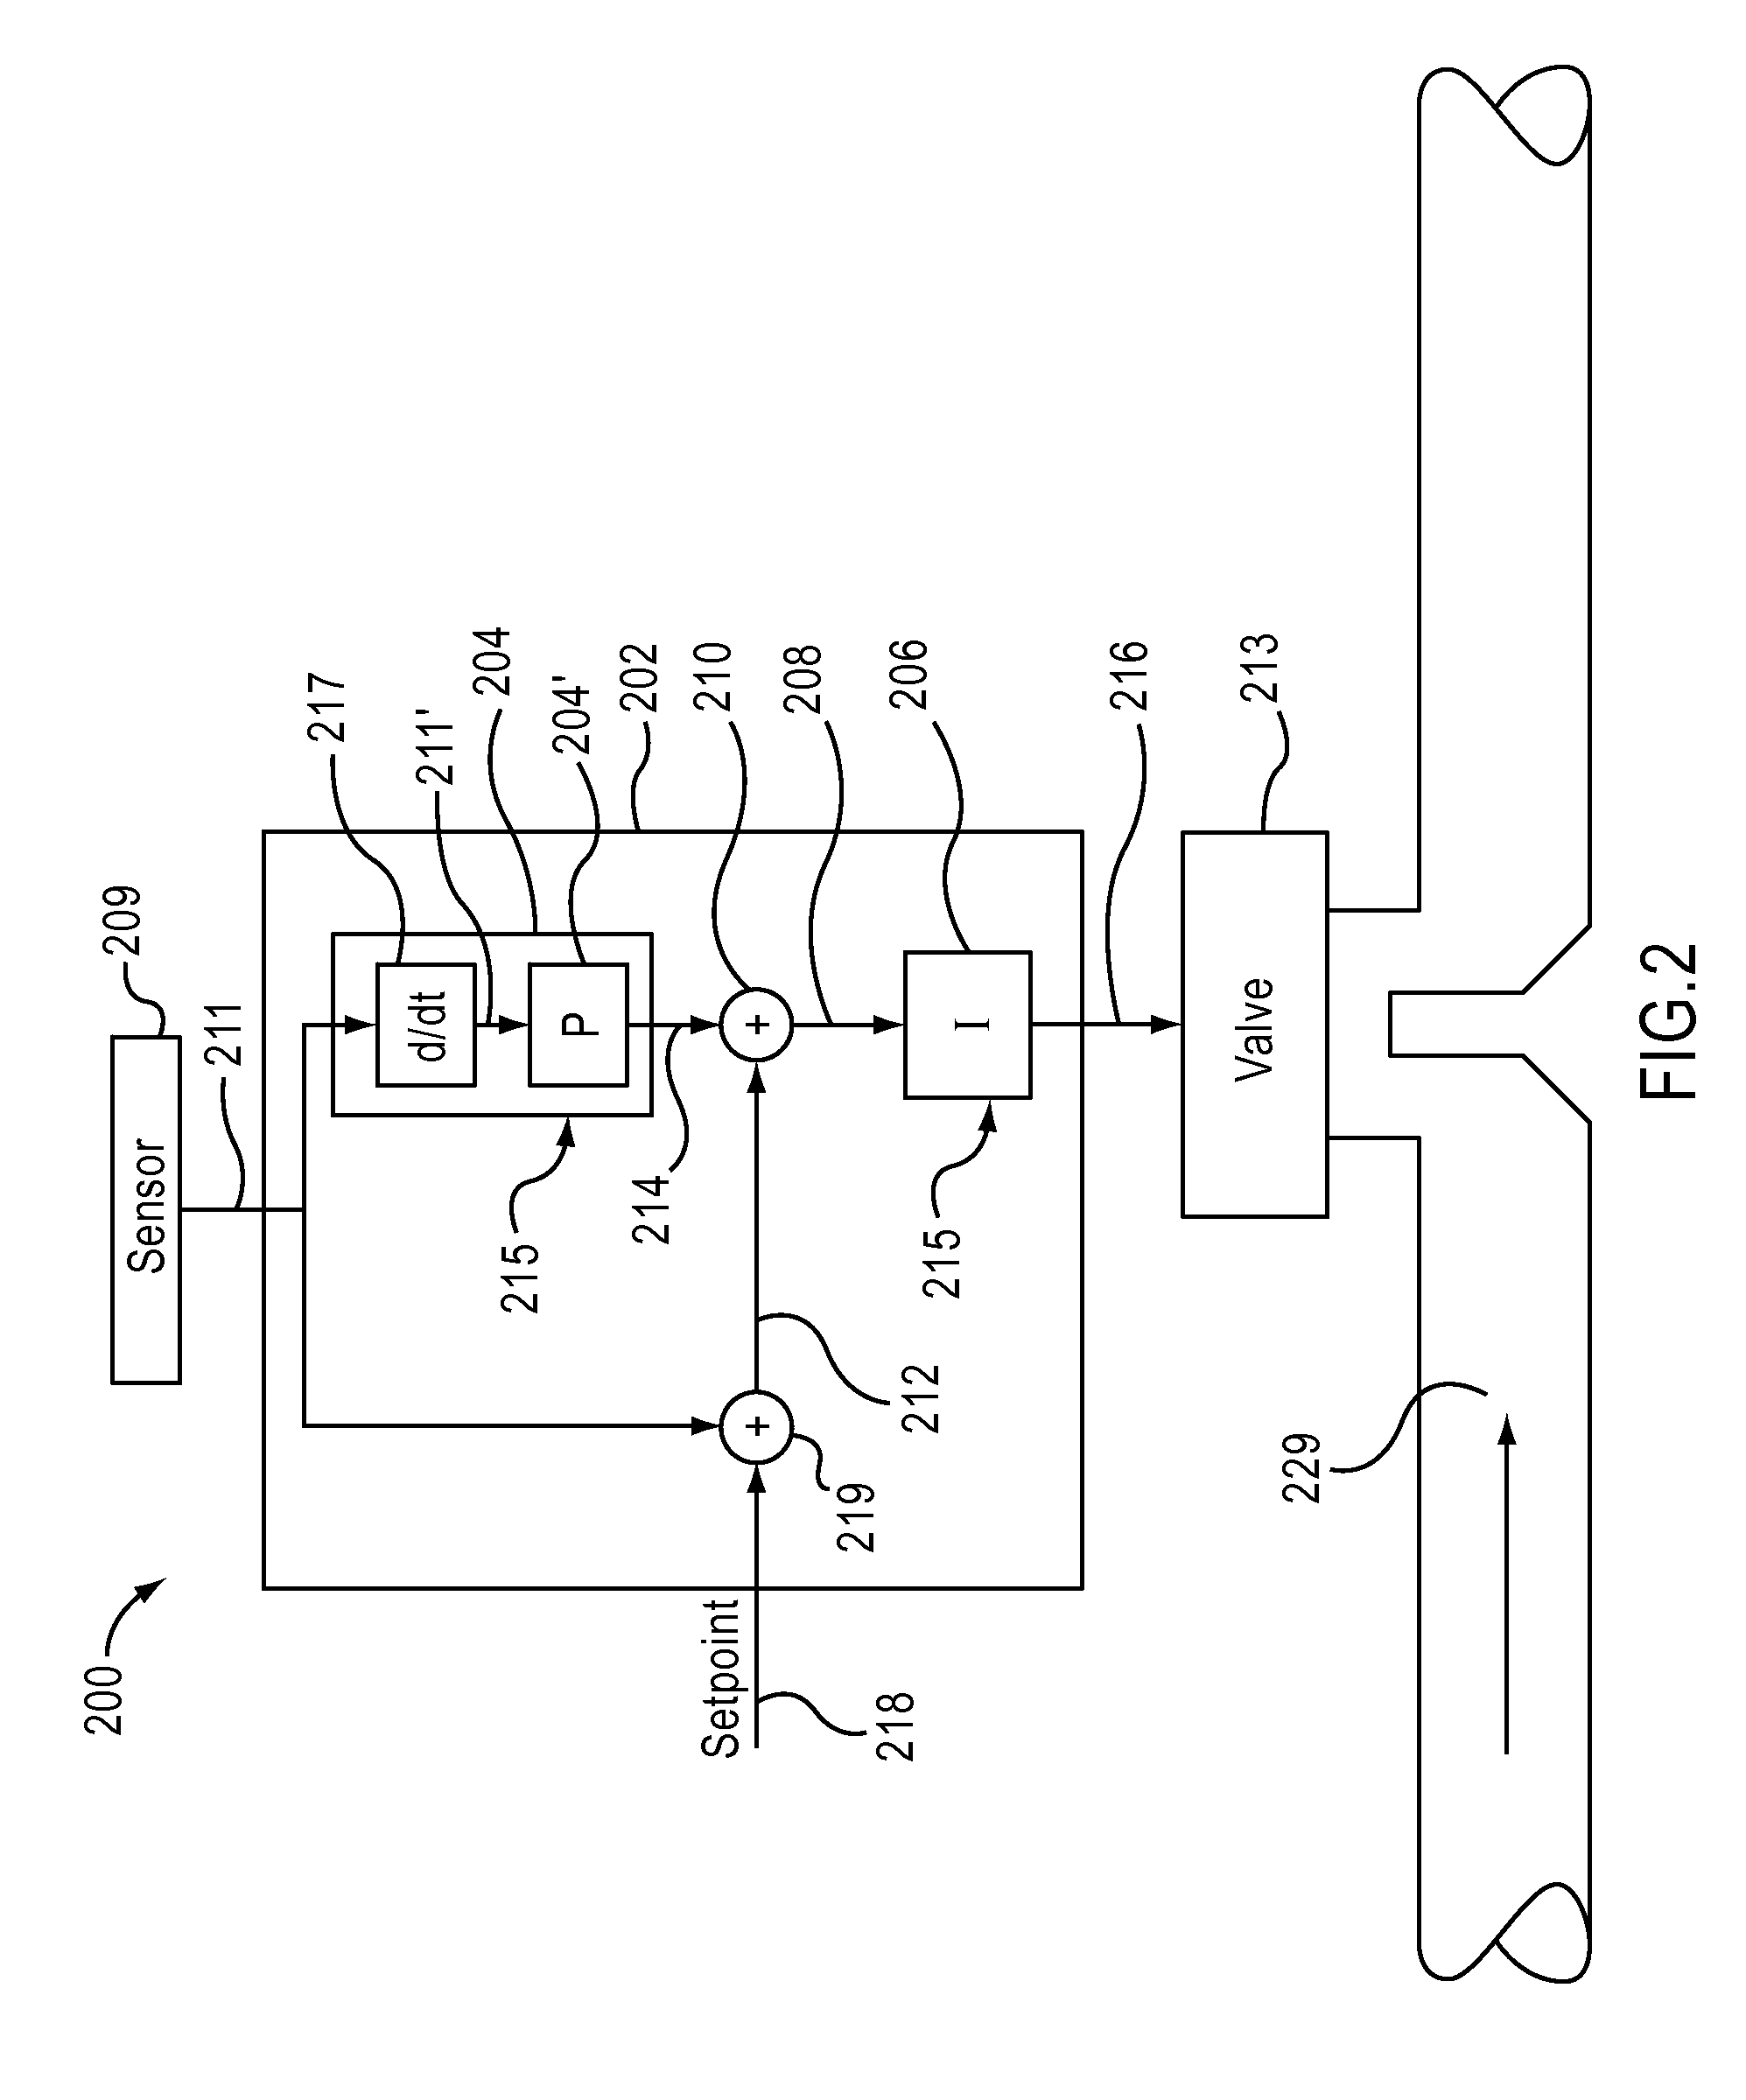 Multi-mode control loop with improved performance for mass flow controller